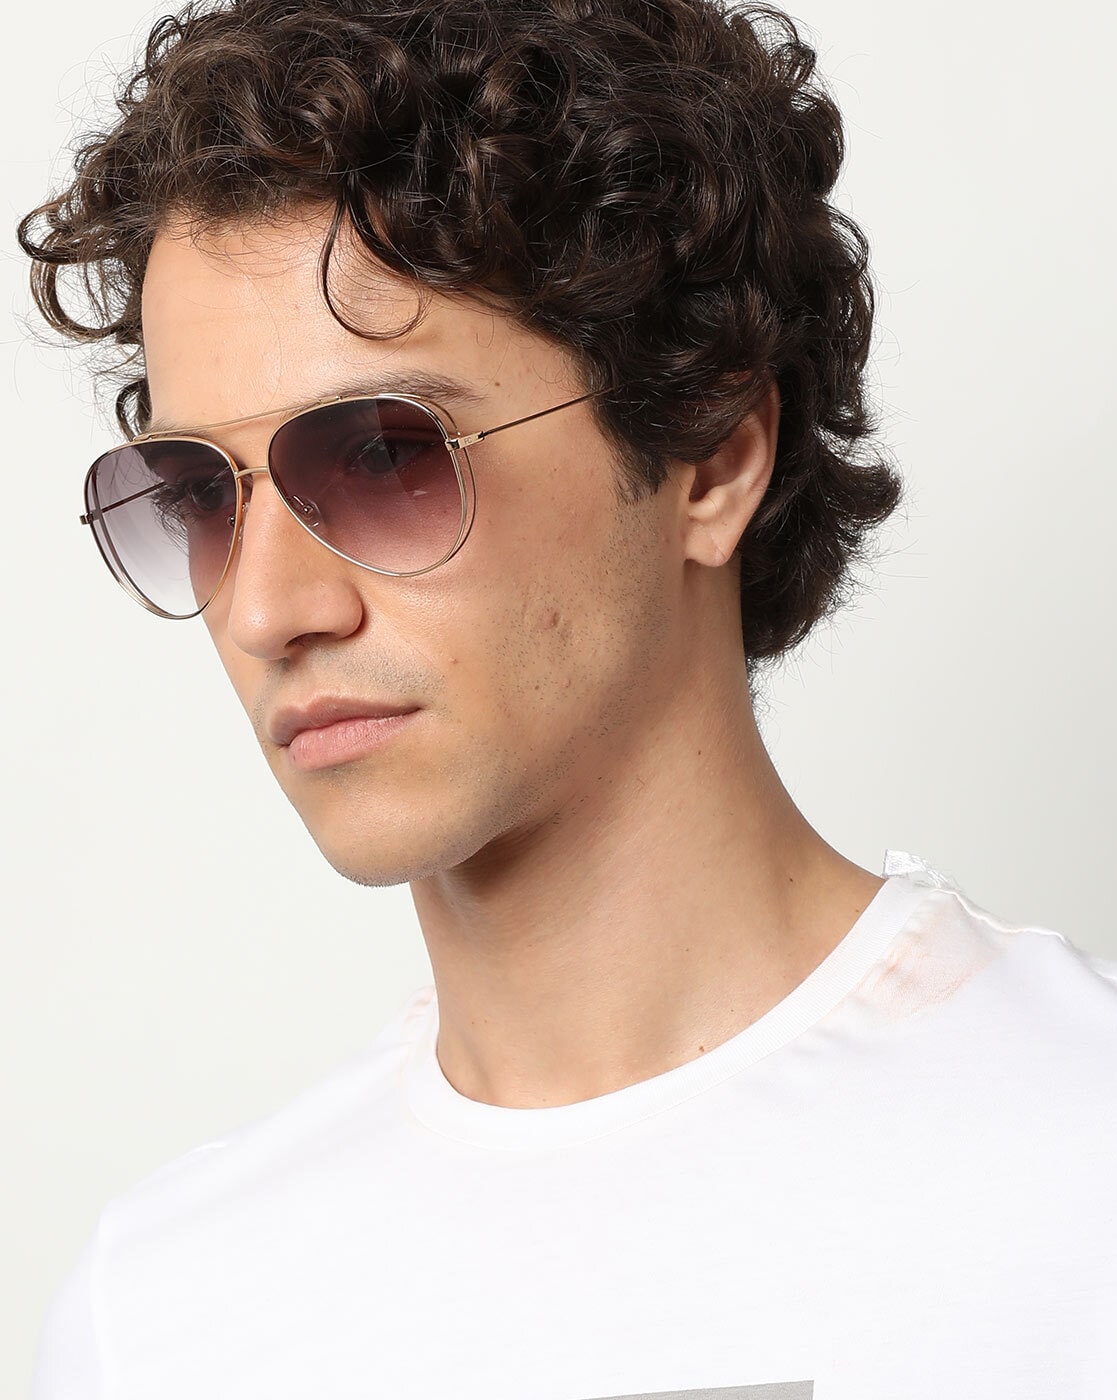 Buy French Connection FC7447 Grey Gradient Pilot Sunglasses Online